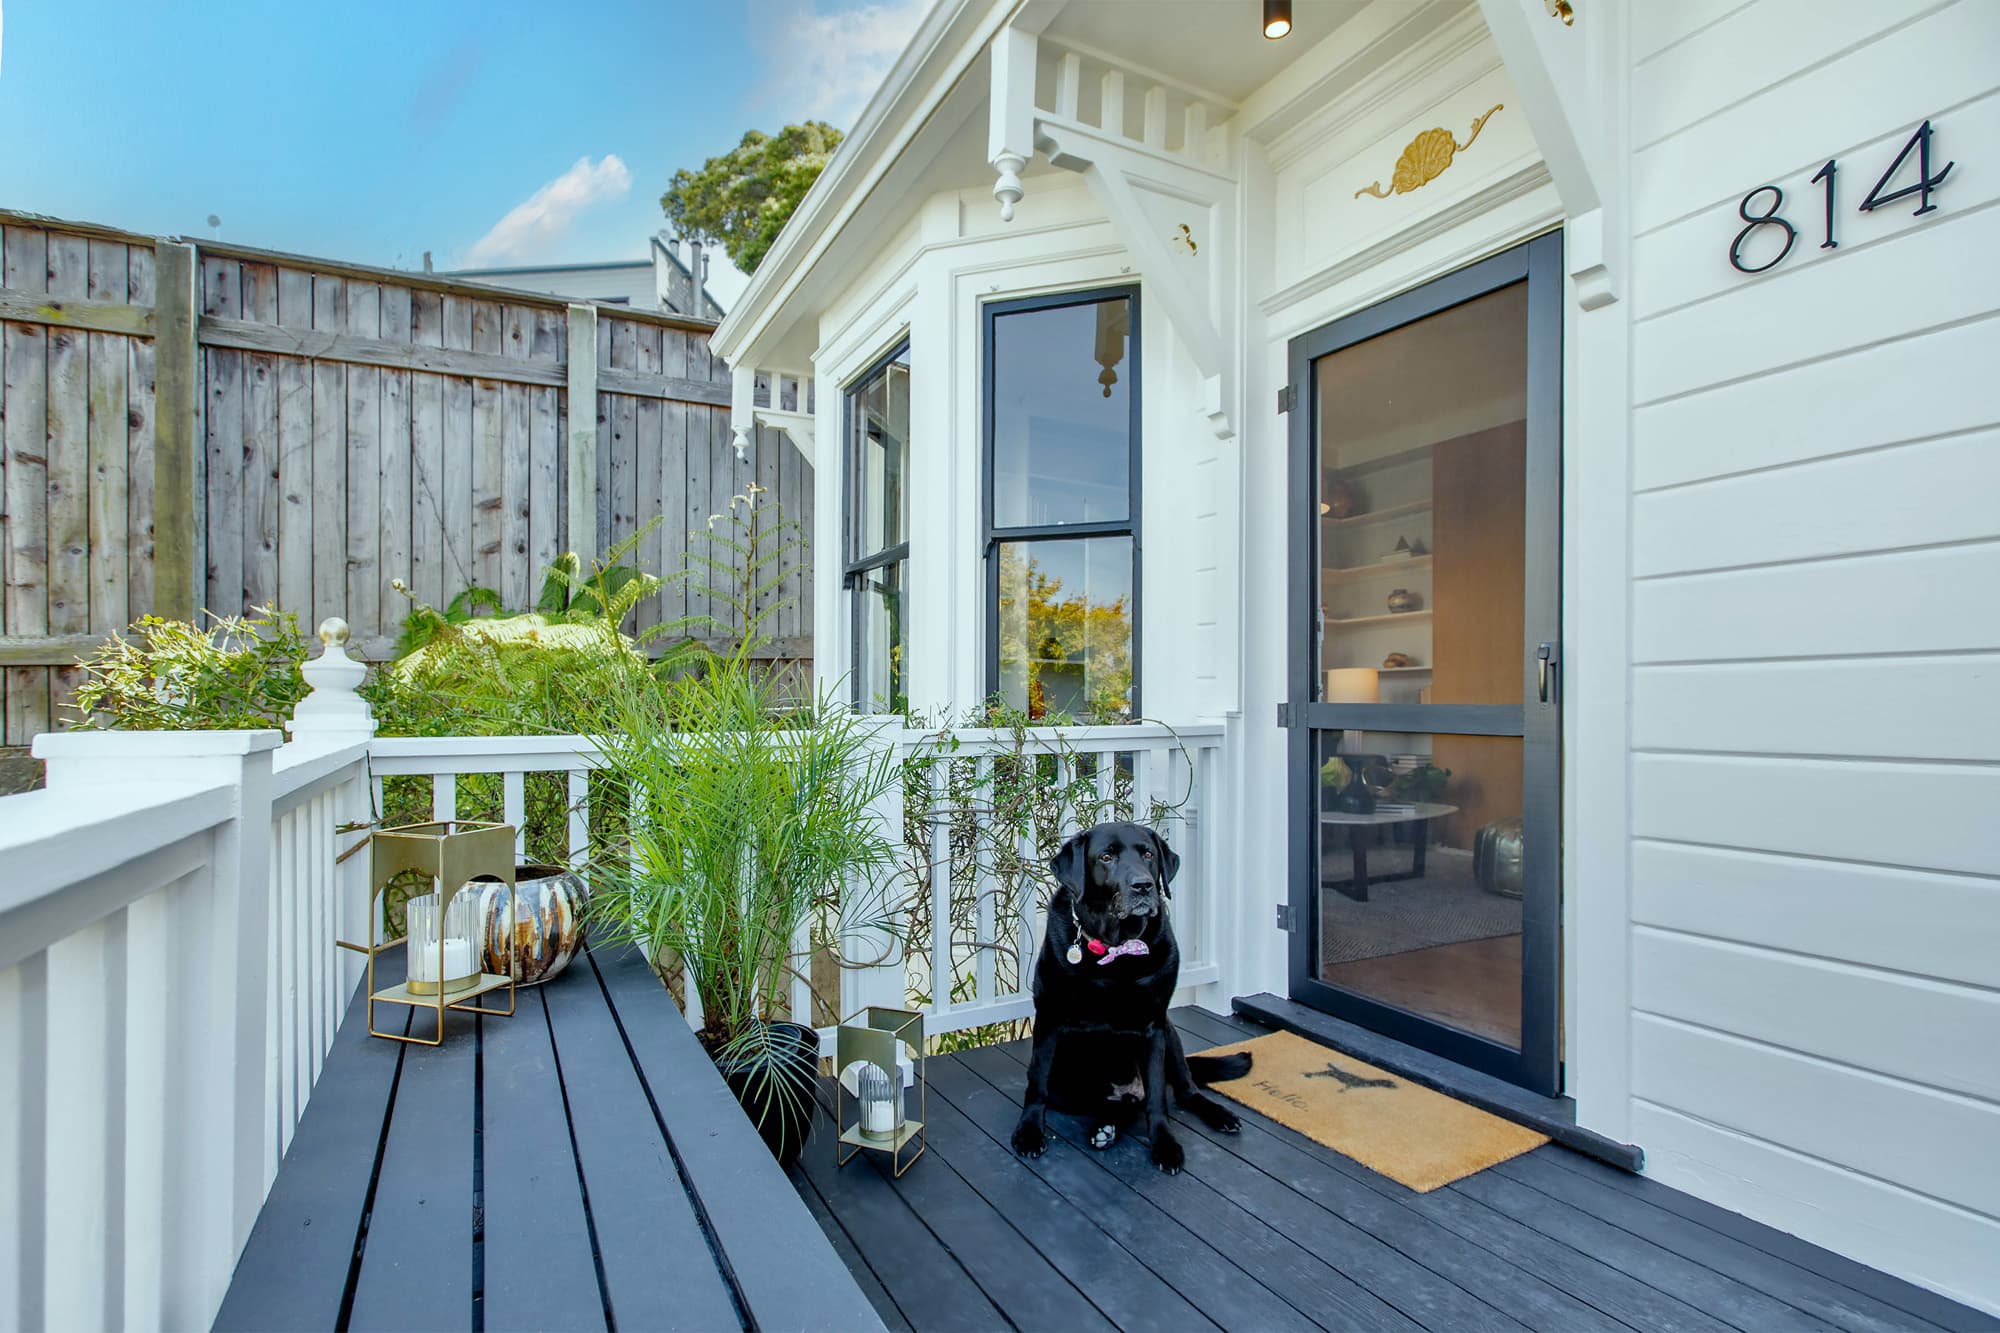 Mr. Raffi, our black Labrador retriever, sits in front of 814 Carolina's newly painted orange front door